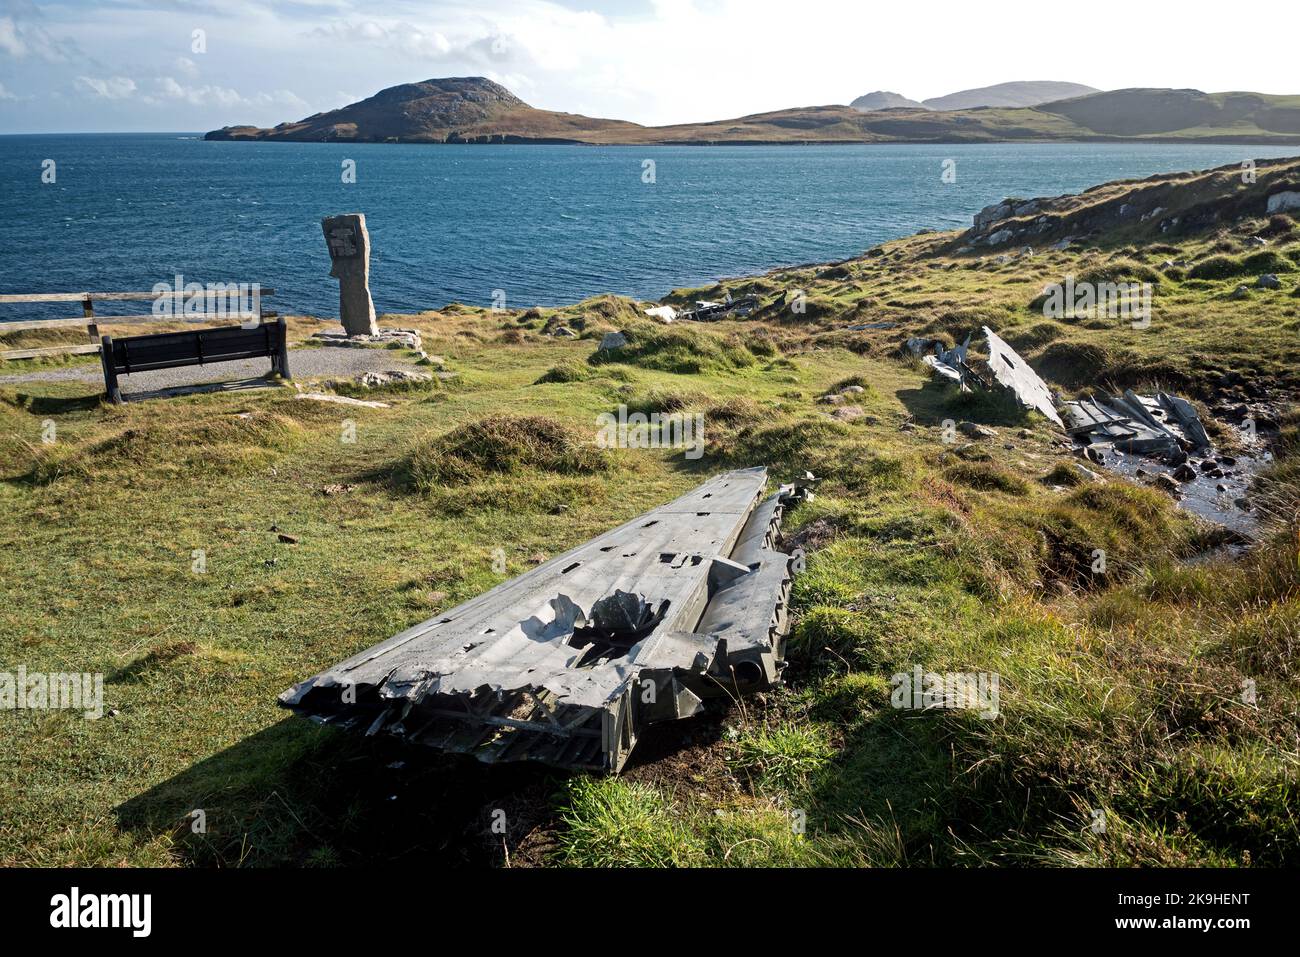 Wreckage of a Catalina flying boat which crashed on the island of Vatersay in 1944 during World War Two. Stock Photo